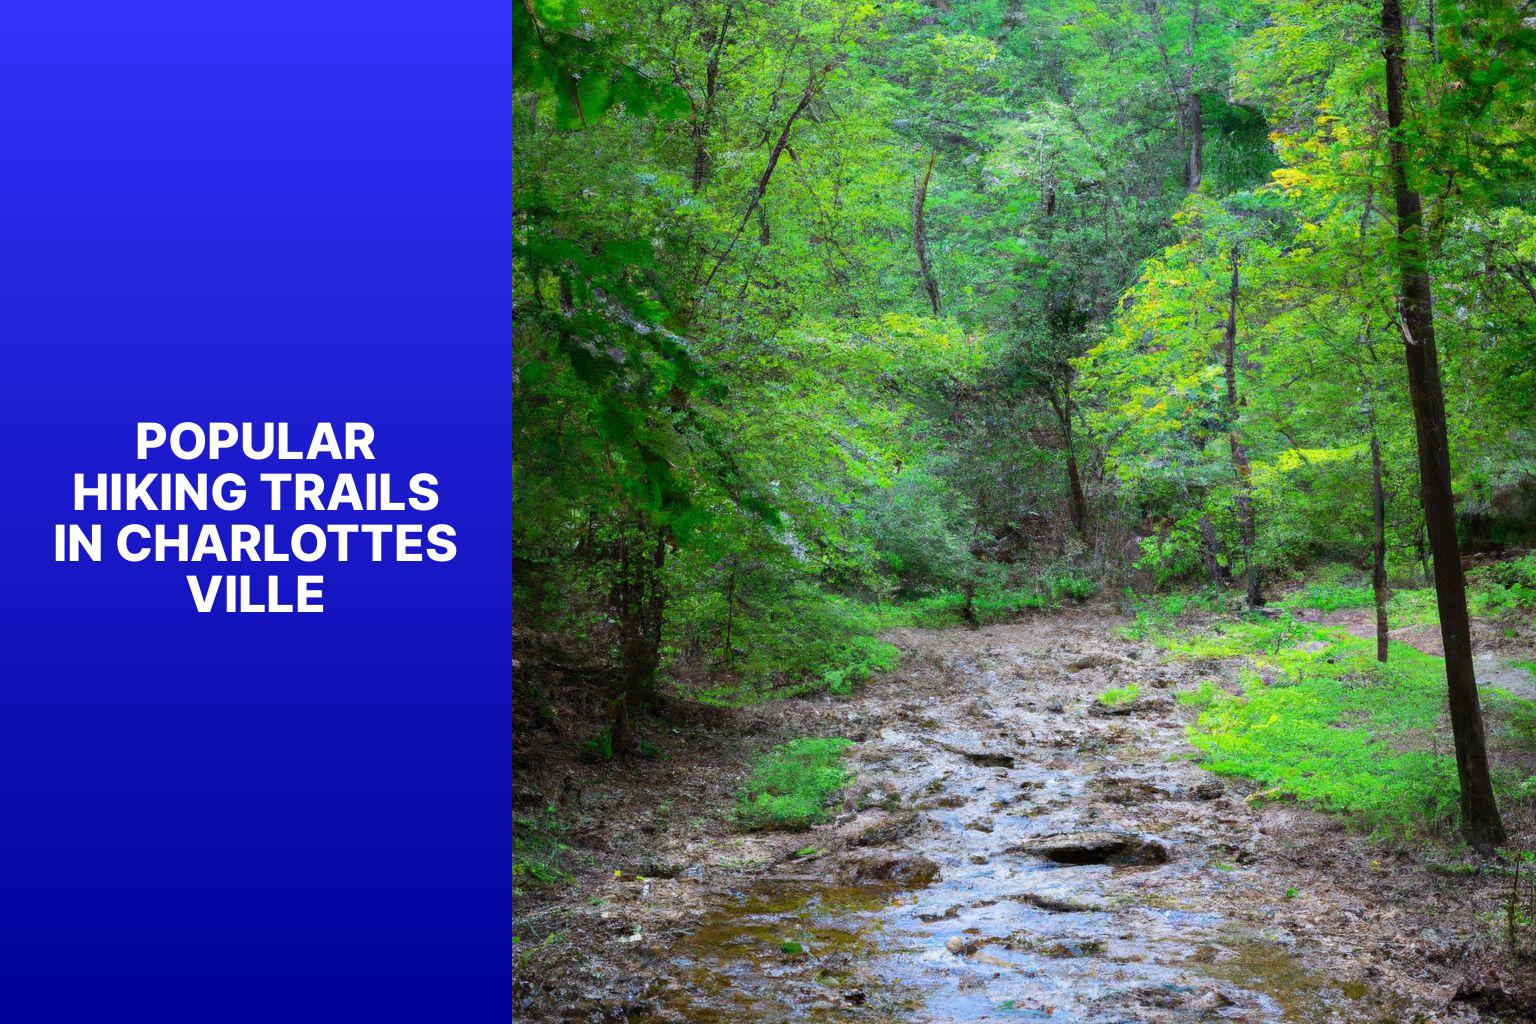 Popular Hiking Trails in Charlottesville - Hikes in Charlottesville 